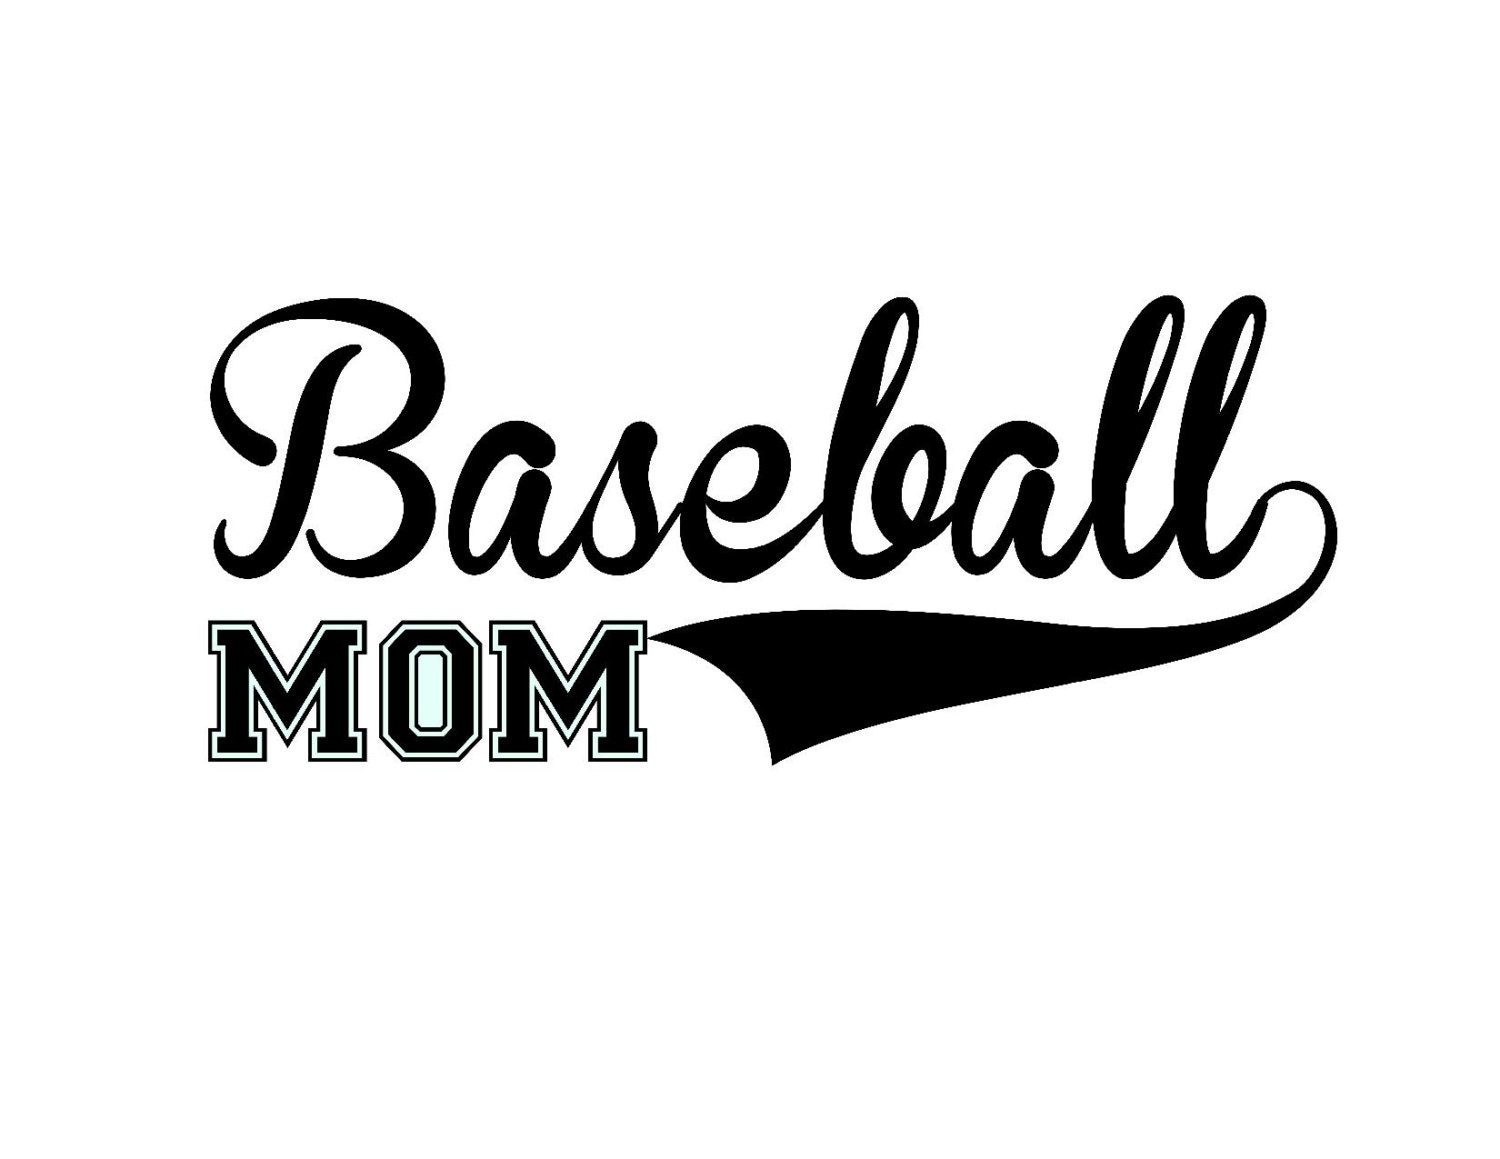 Download Baseball Mom Iron On Vinyl or Vinyl Car Decal from ...